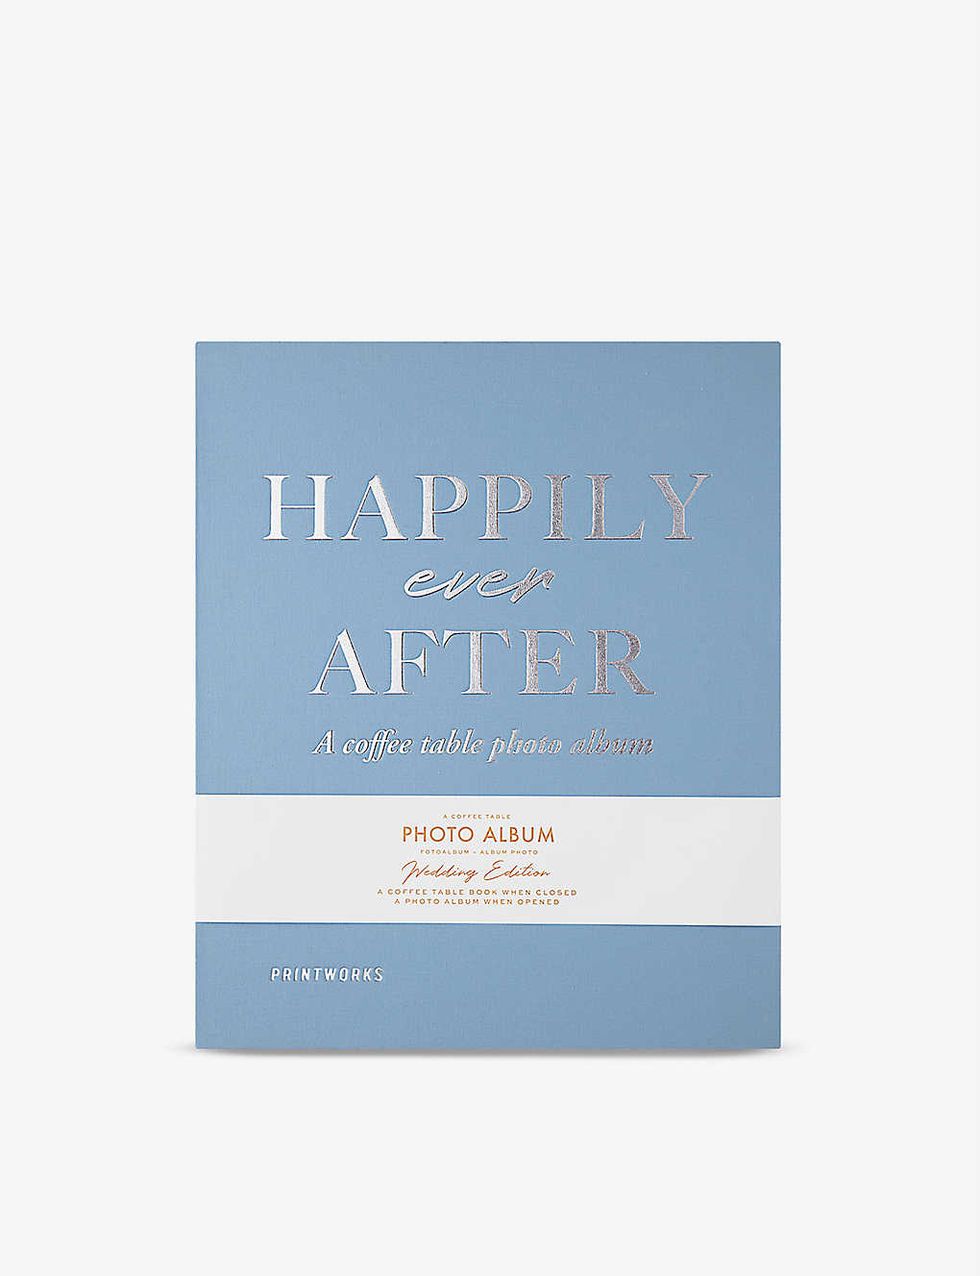 Happily Ever After coffee table photo album 21cm x 28cm